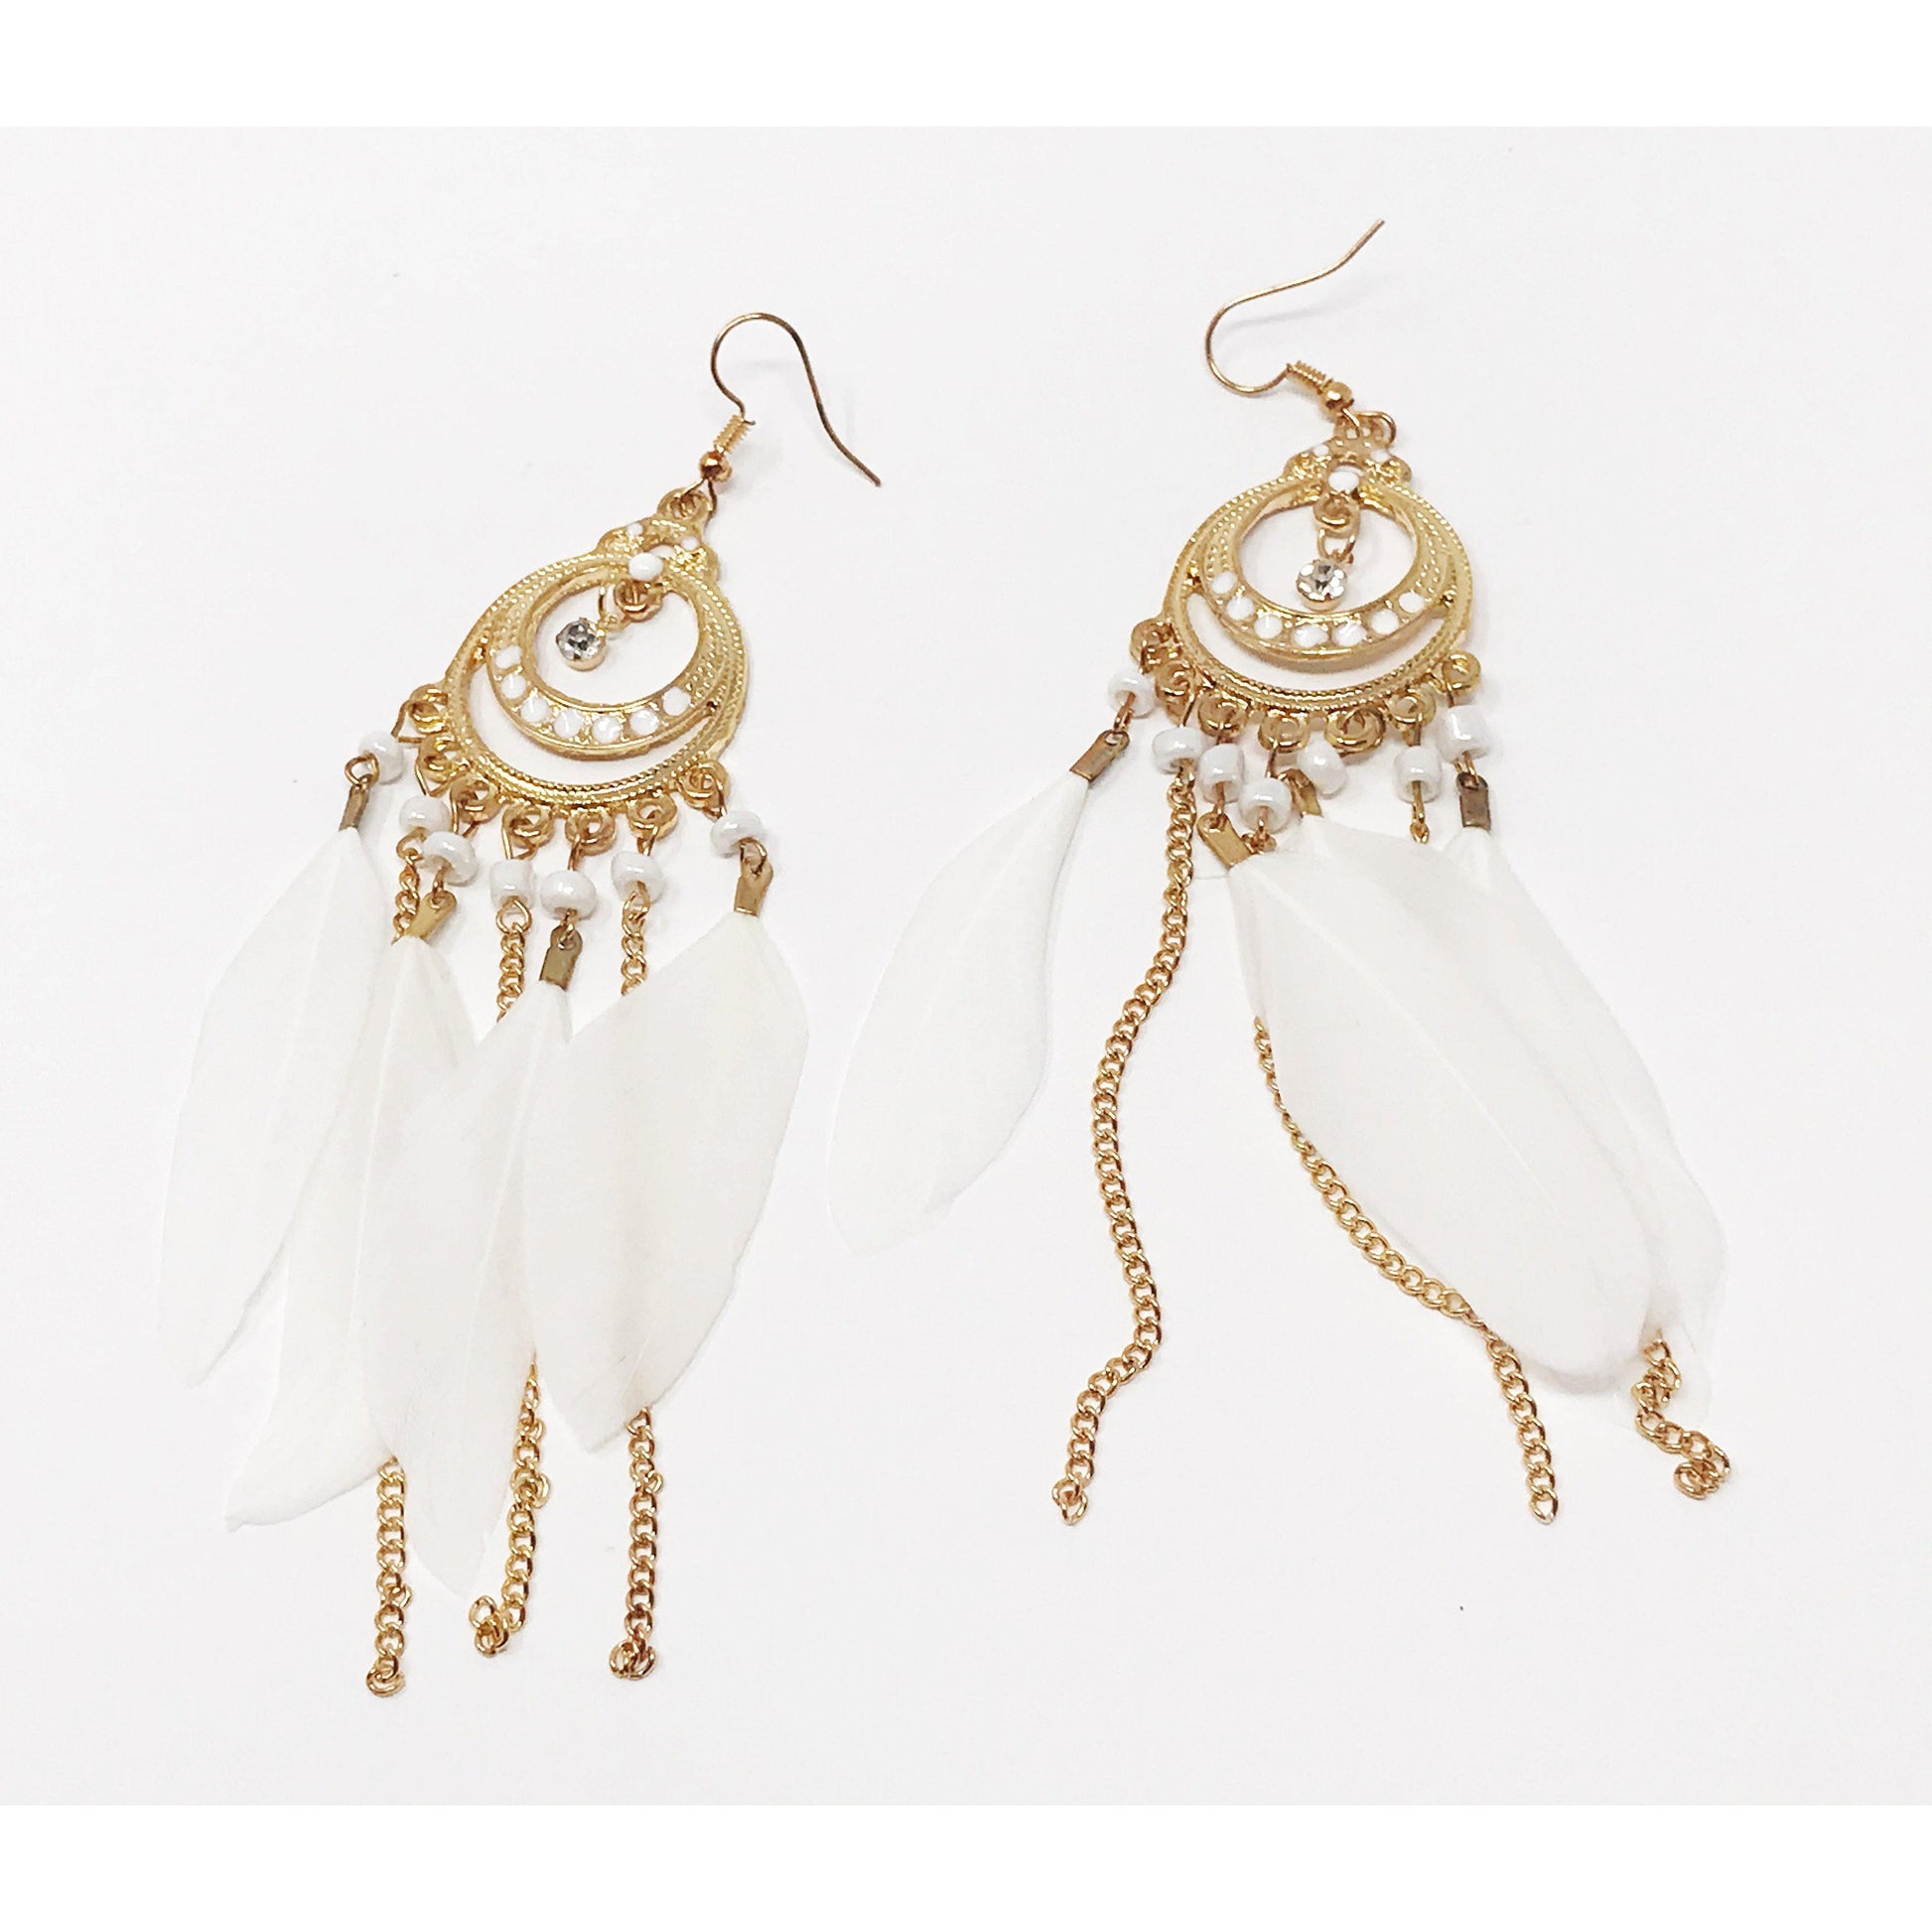 White Feather Dangle Chain Earrings: Elegant Bohemian Accents for Effortlessly Chic Looks